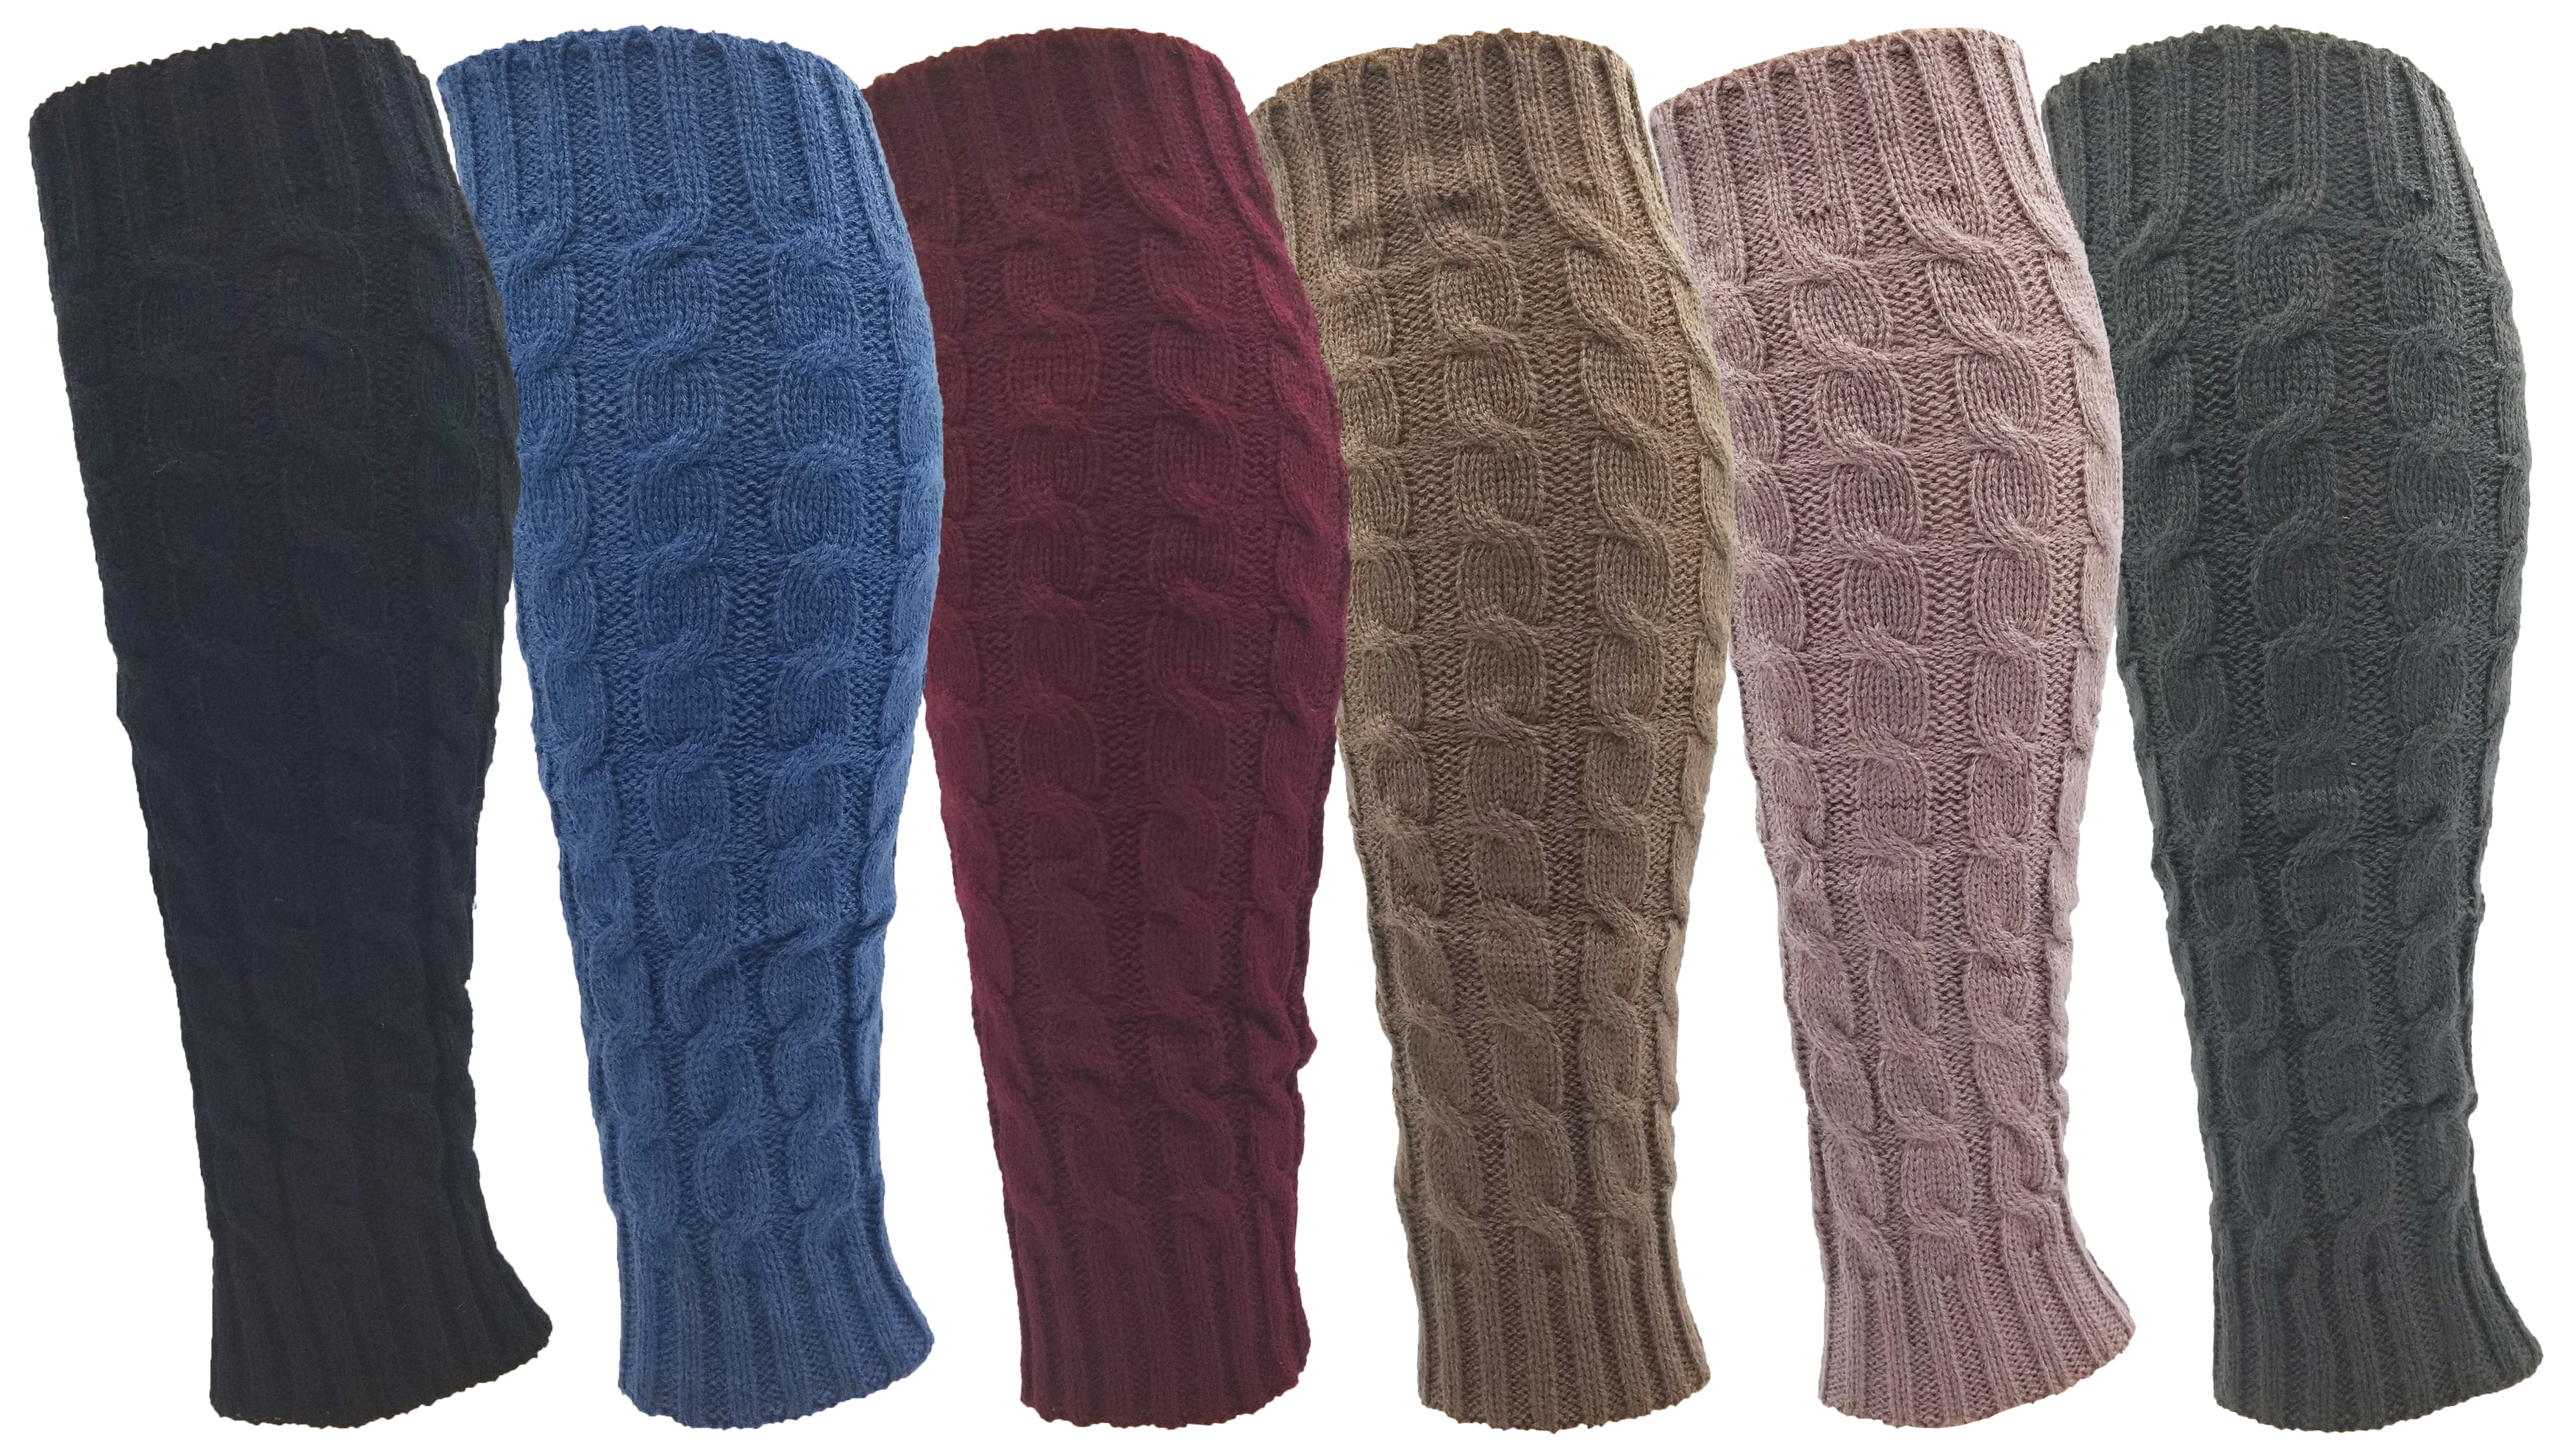 Leg Warmers for Women, 6 Pairs Knee High Cable Knit Warm Thermal ...